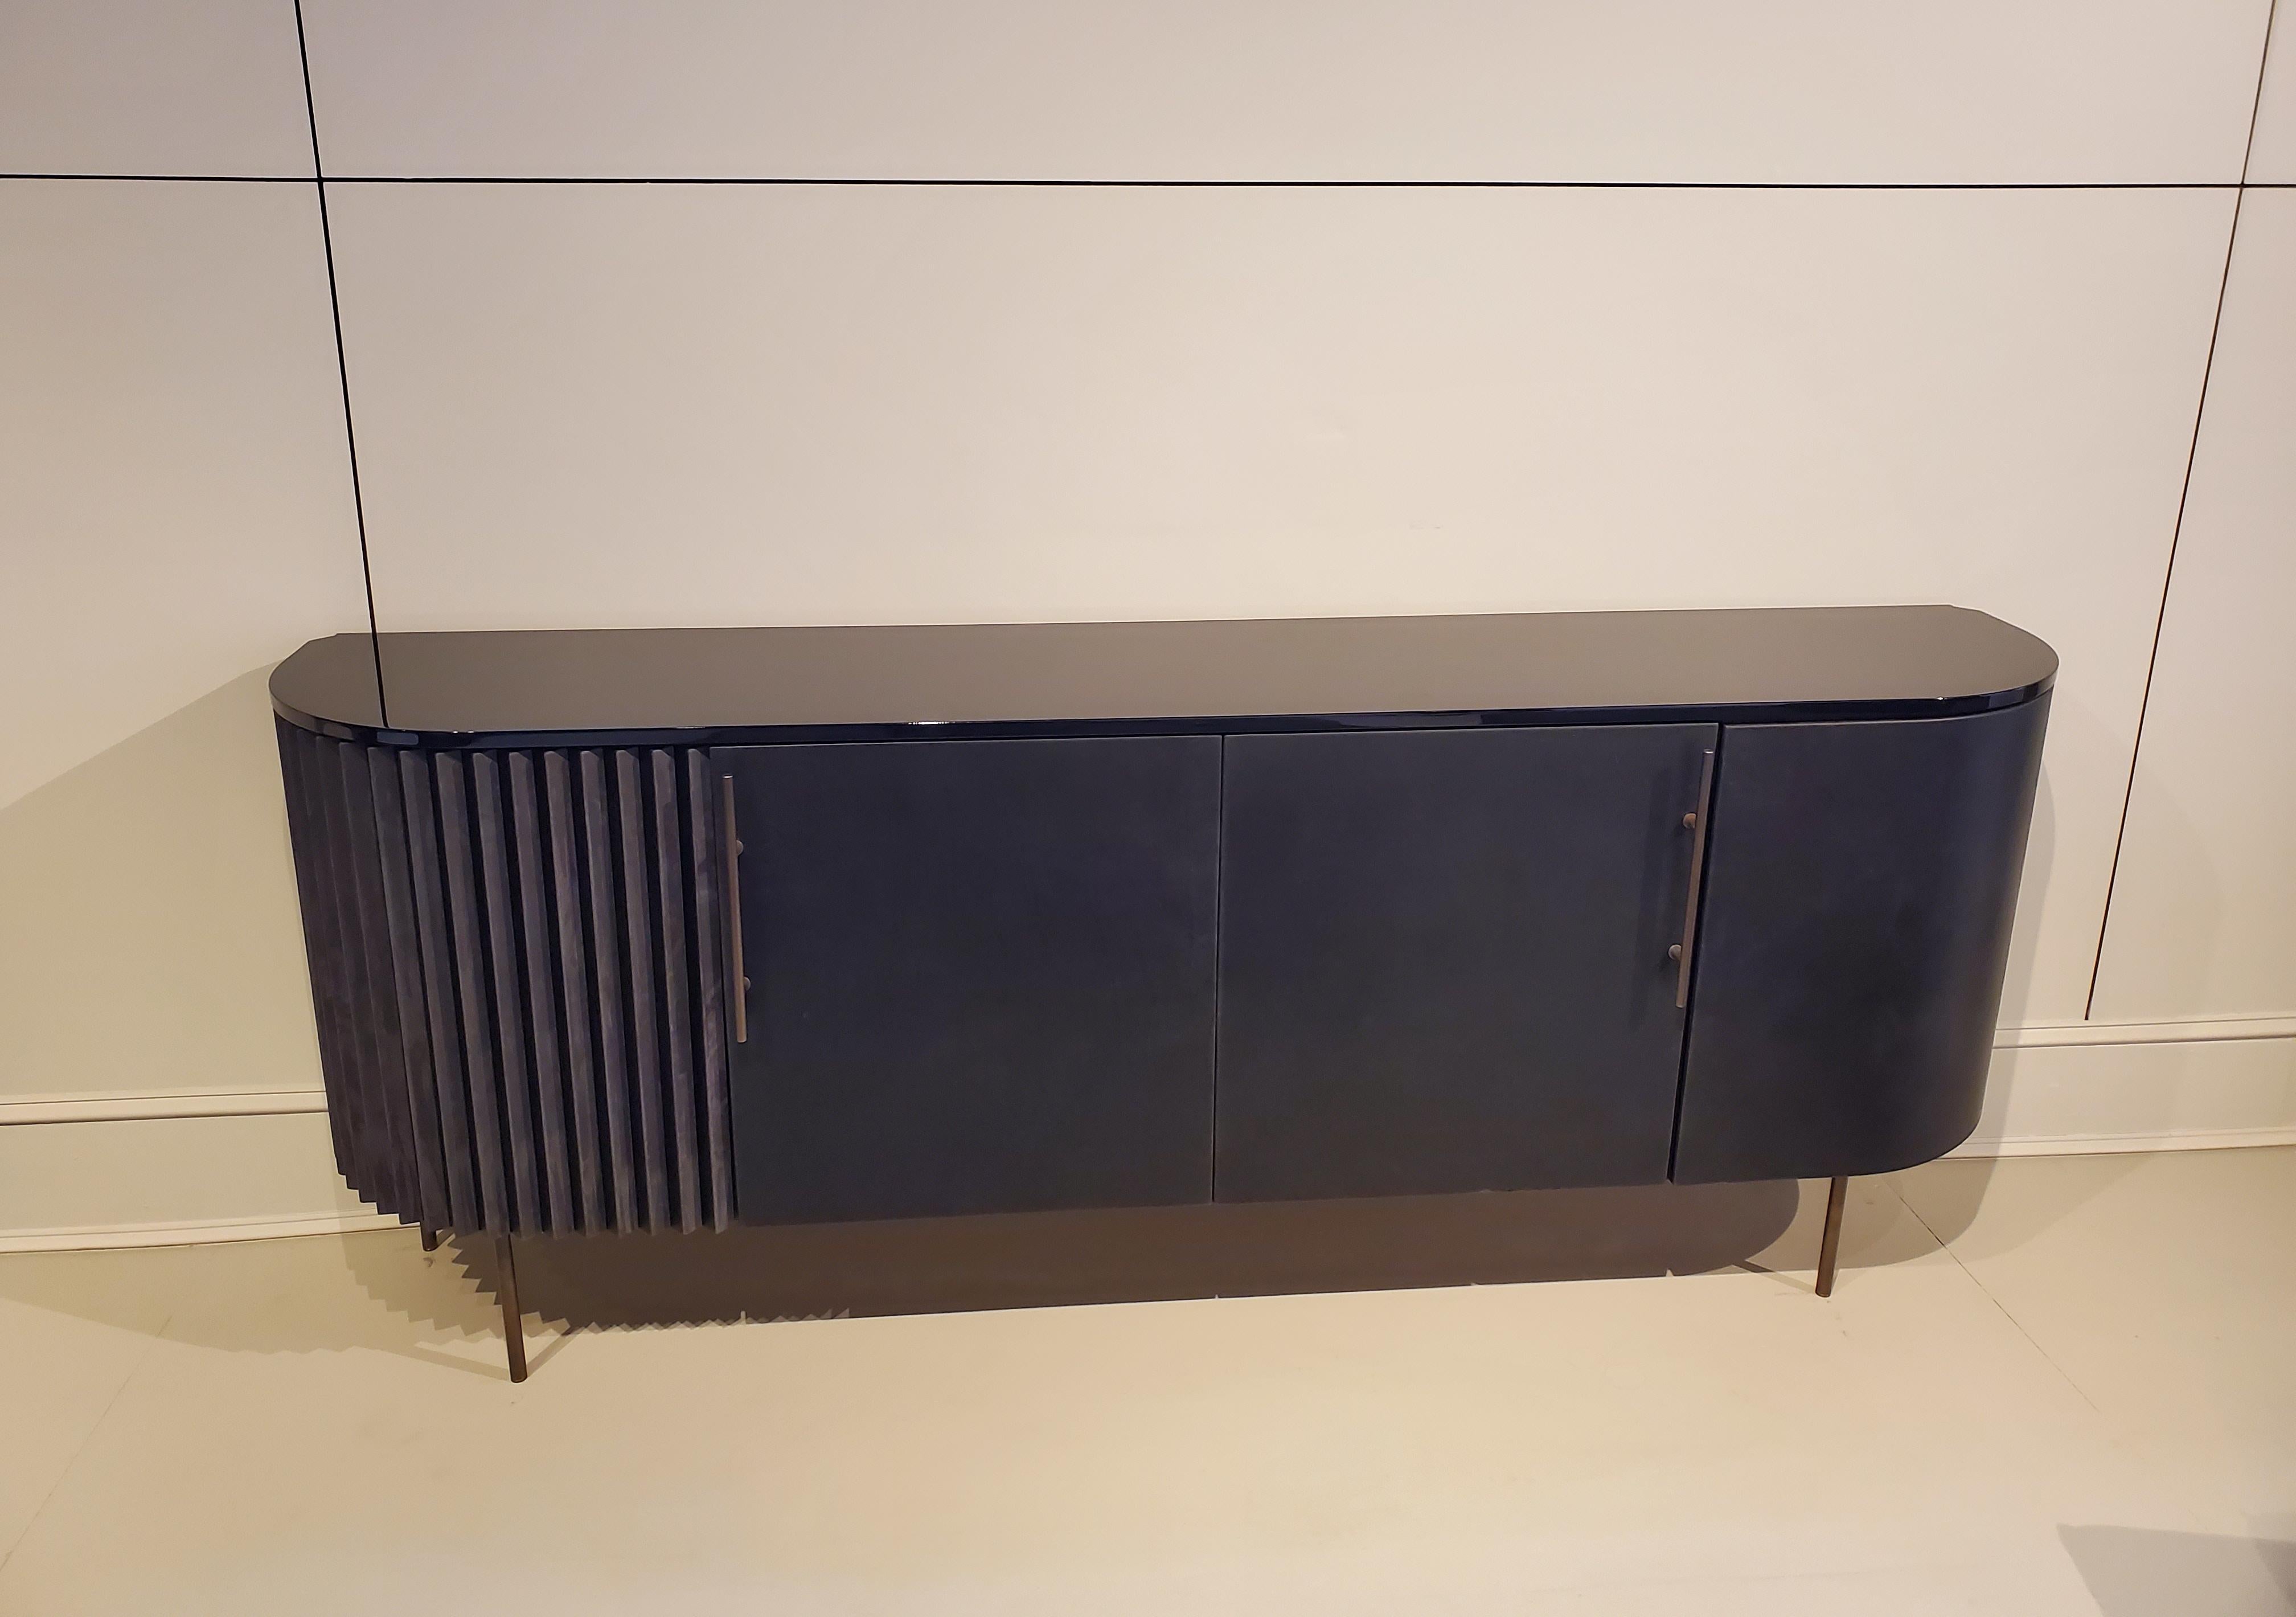 Made in Italy.

An elegant, grounding credenza with a delightful corner twist, offering a captivating view into its pleated detail at every angle. Designed by Draga & Aurel.

Showroom floor model in great condition. 

Burnished brass base.